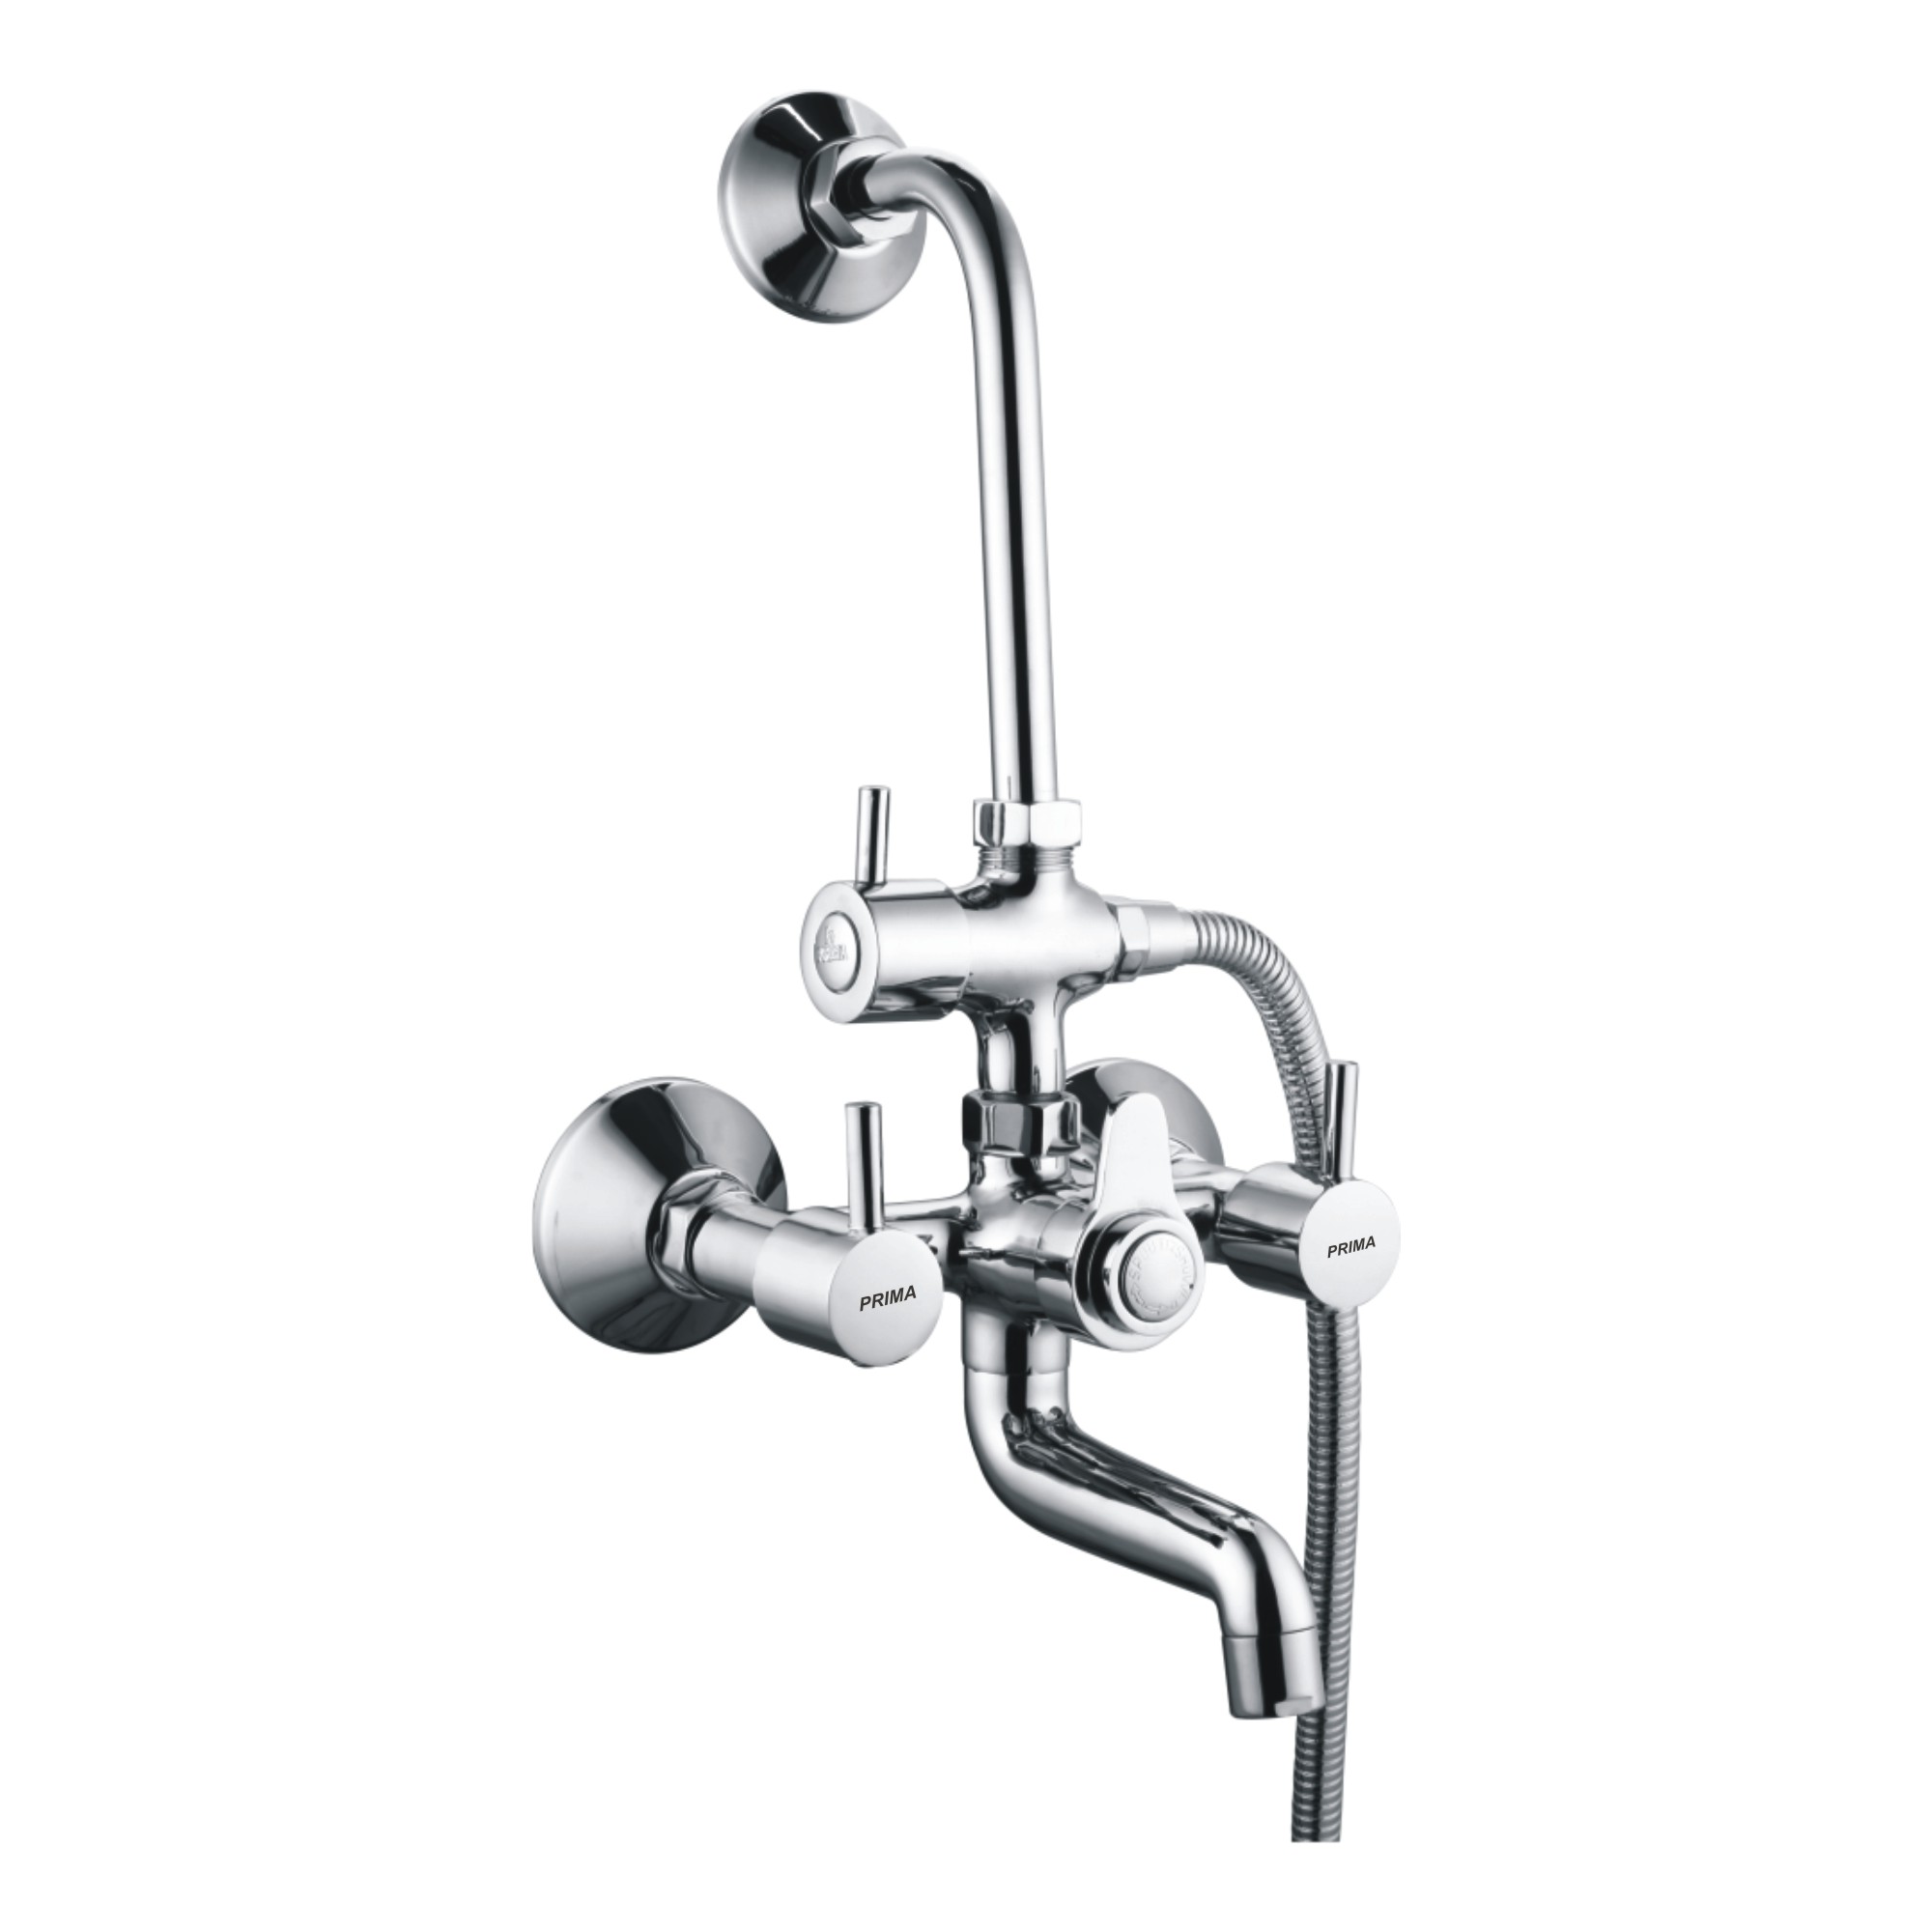 C.P Wall Mixer 3 in 1 System With Bend Set Tele